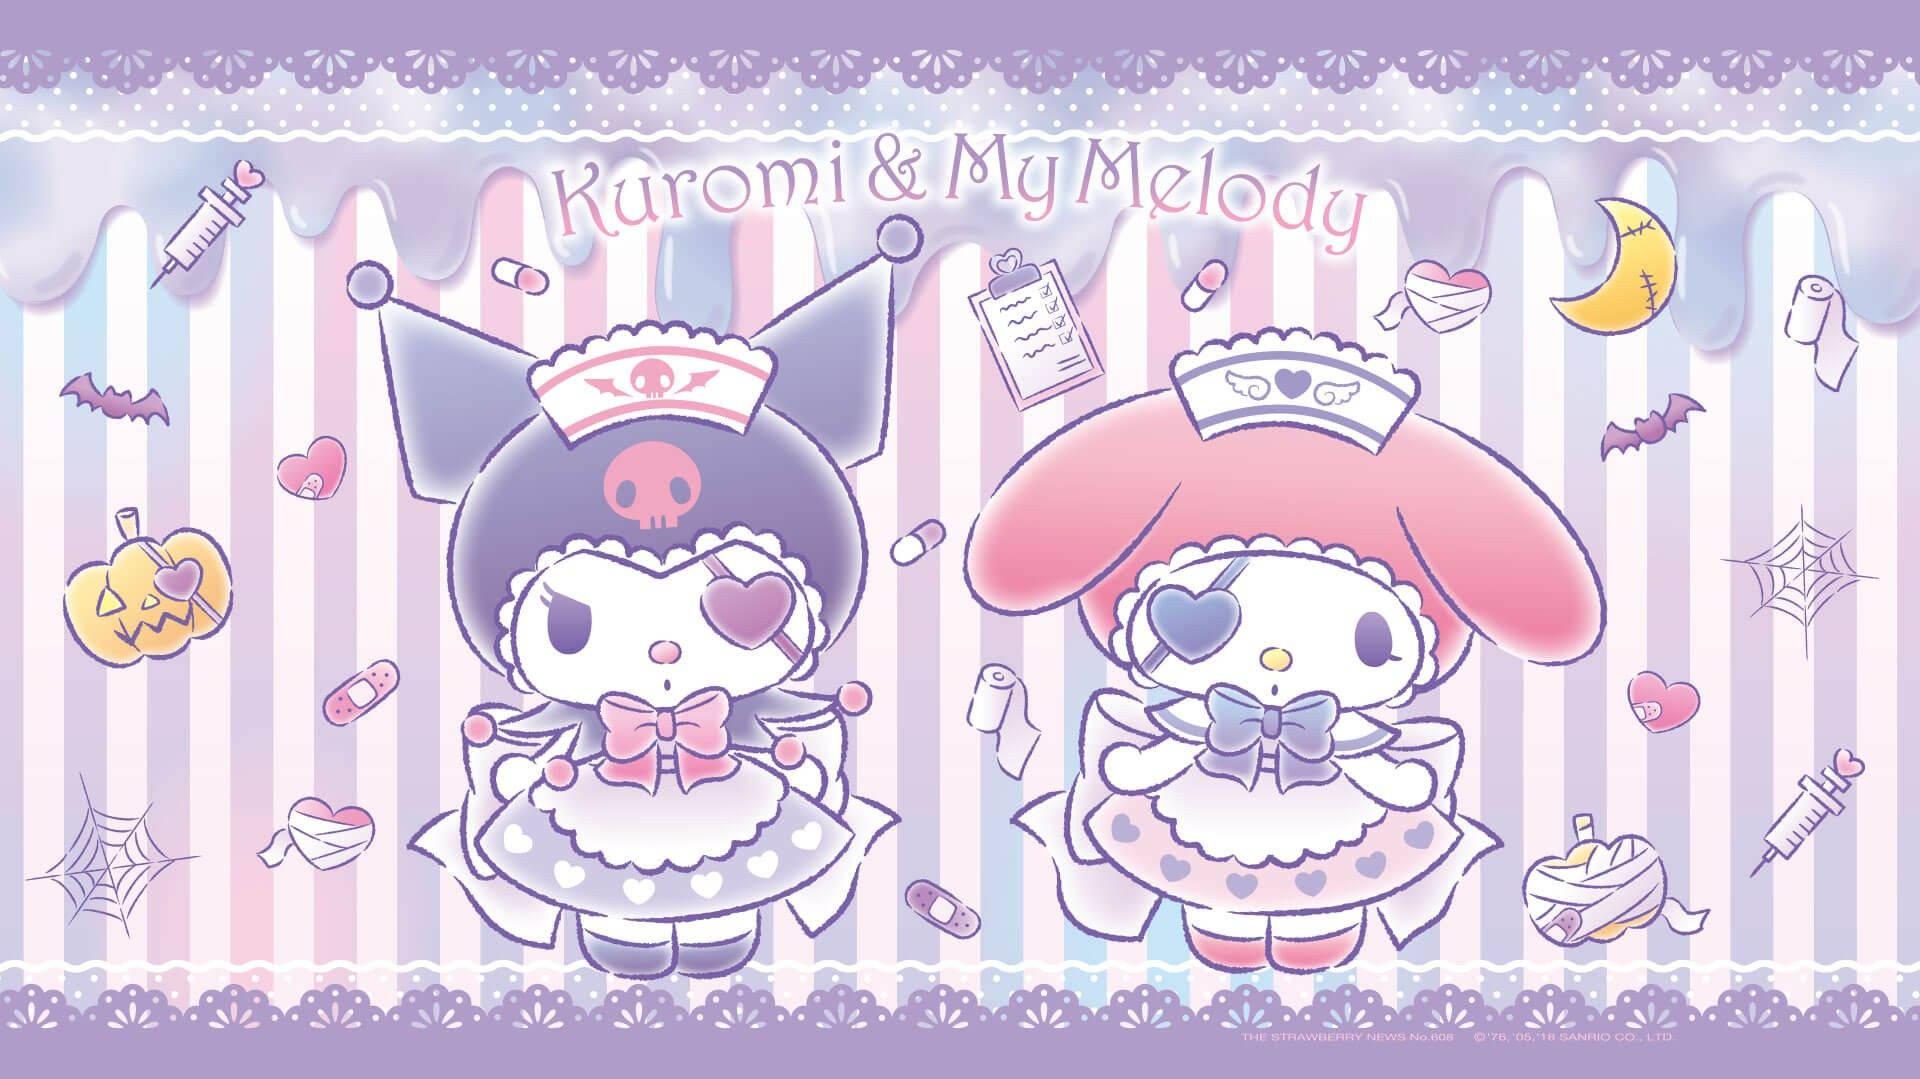 Download Halloween Themed Kuromi And Melody Wallpaper